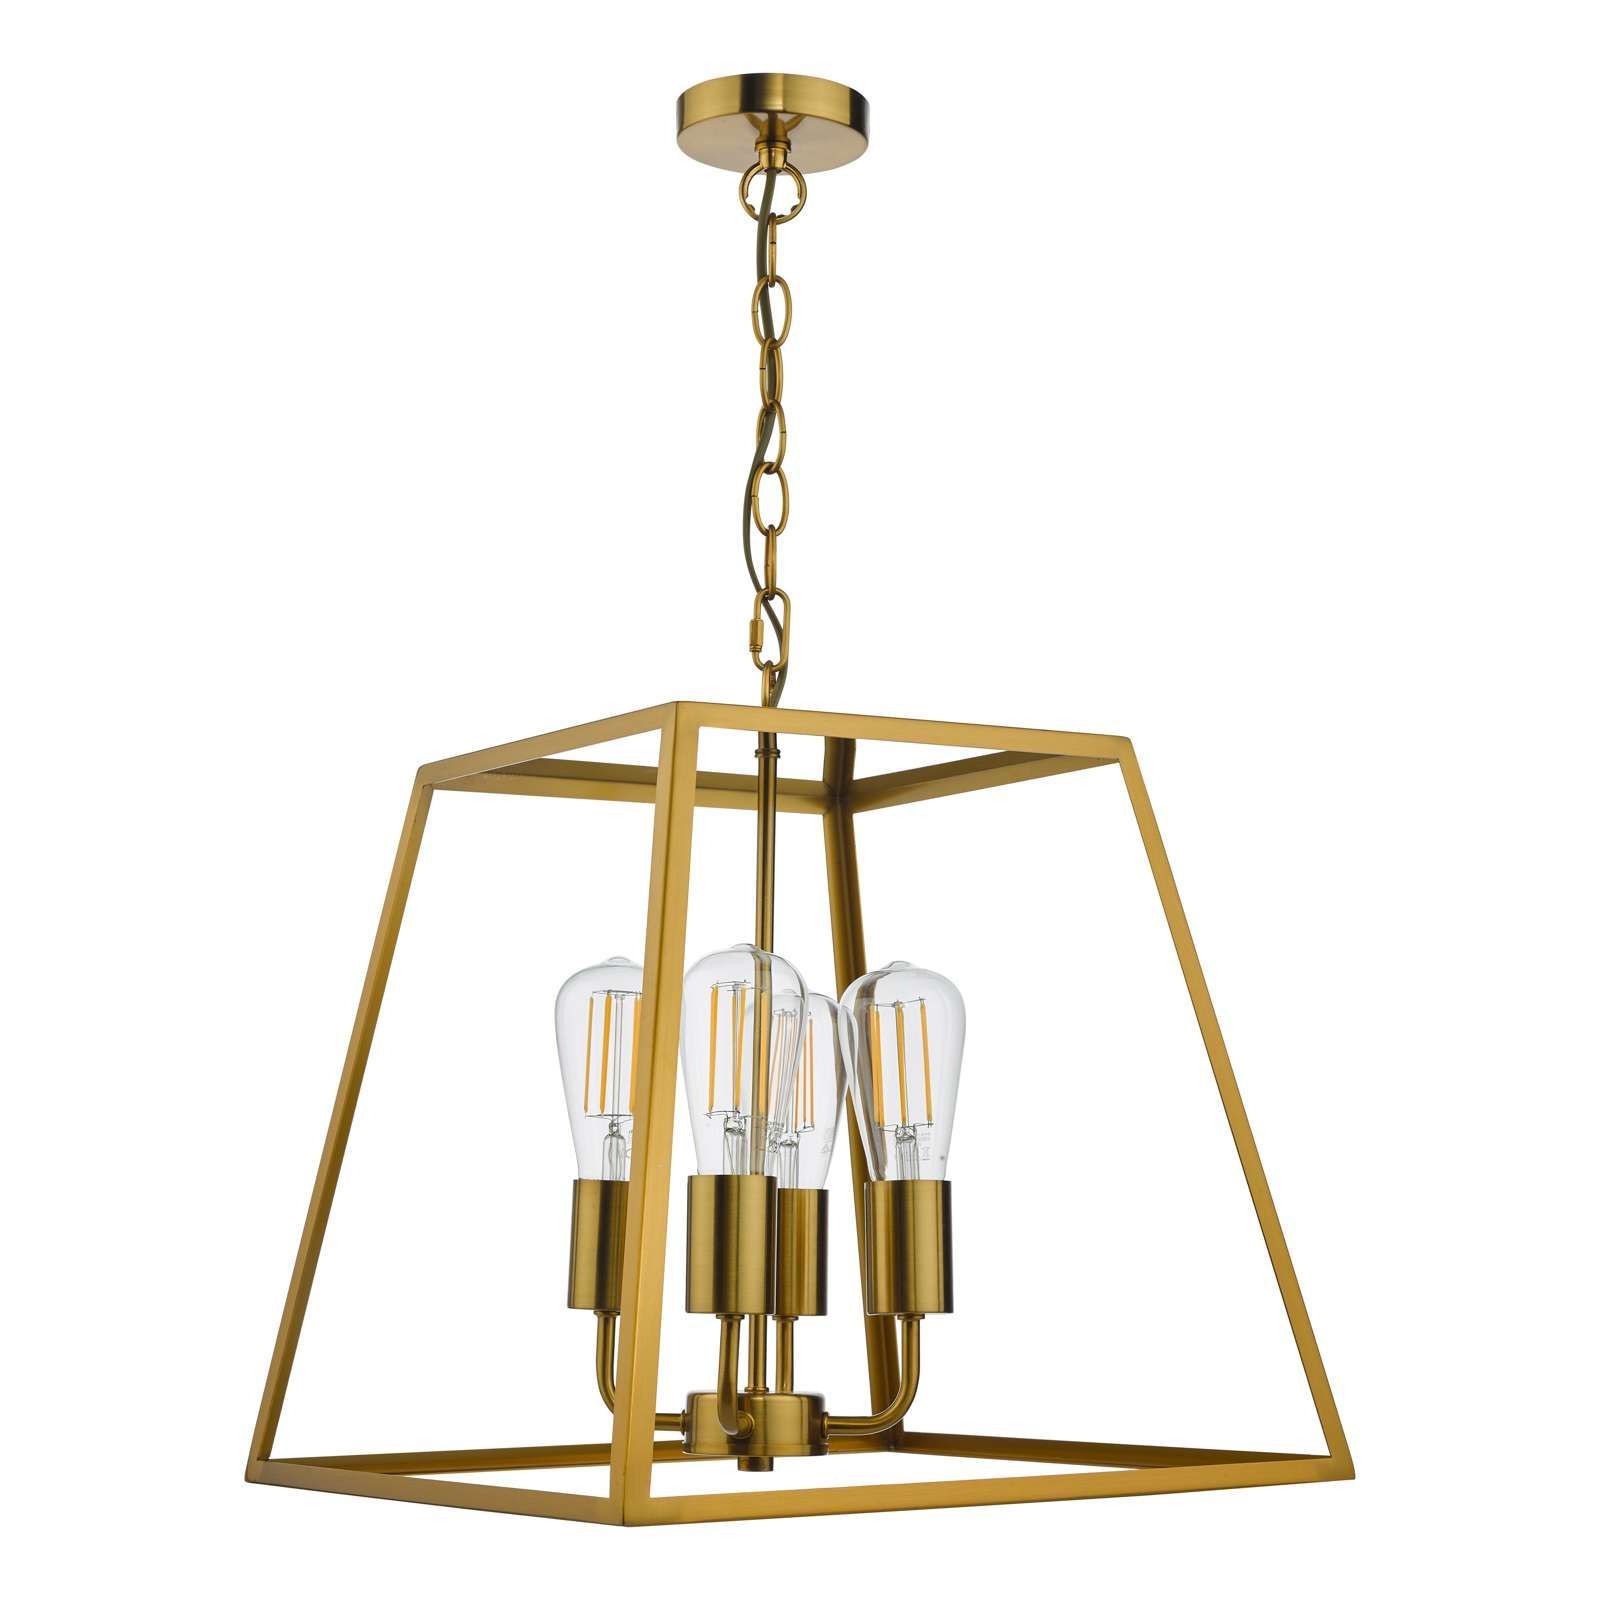 Famous Academy 4 Light Lantern Natural Brass With Natural Brass Lantern Chandeliers (View 5 of 15)